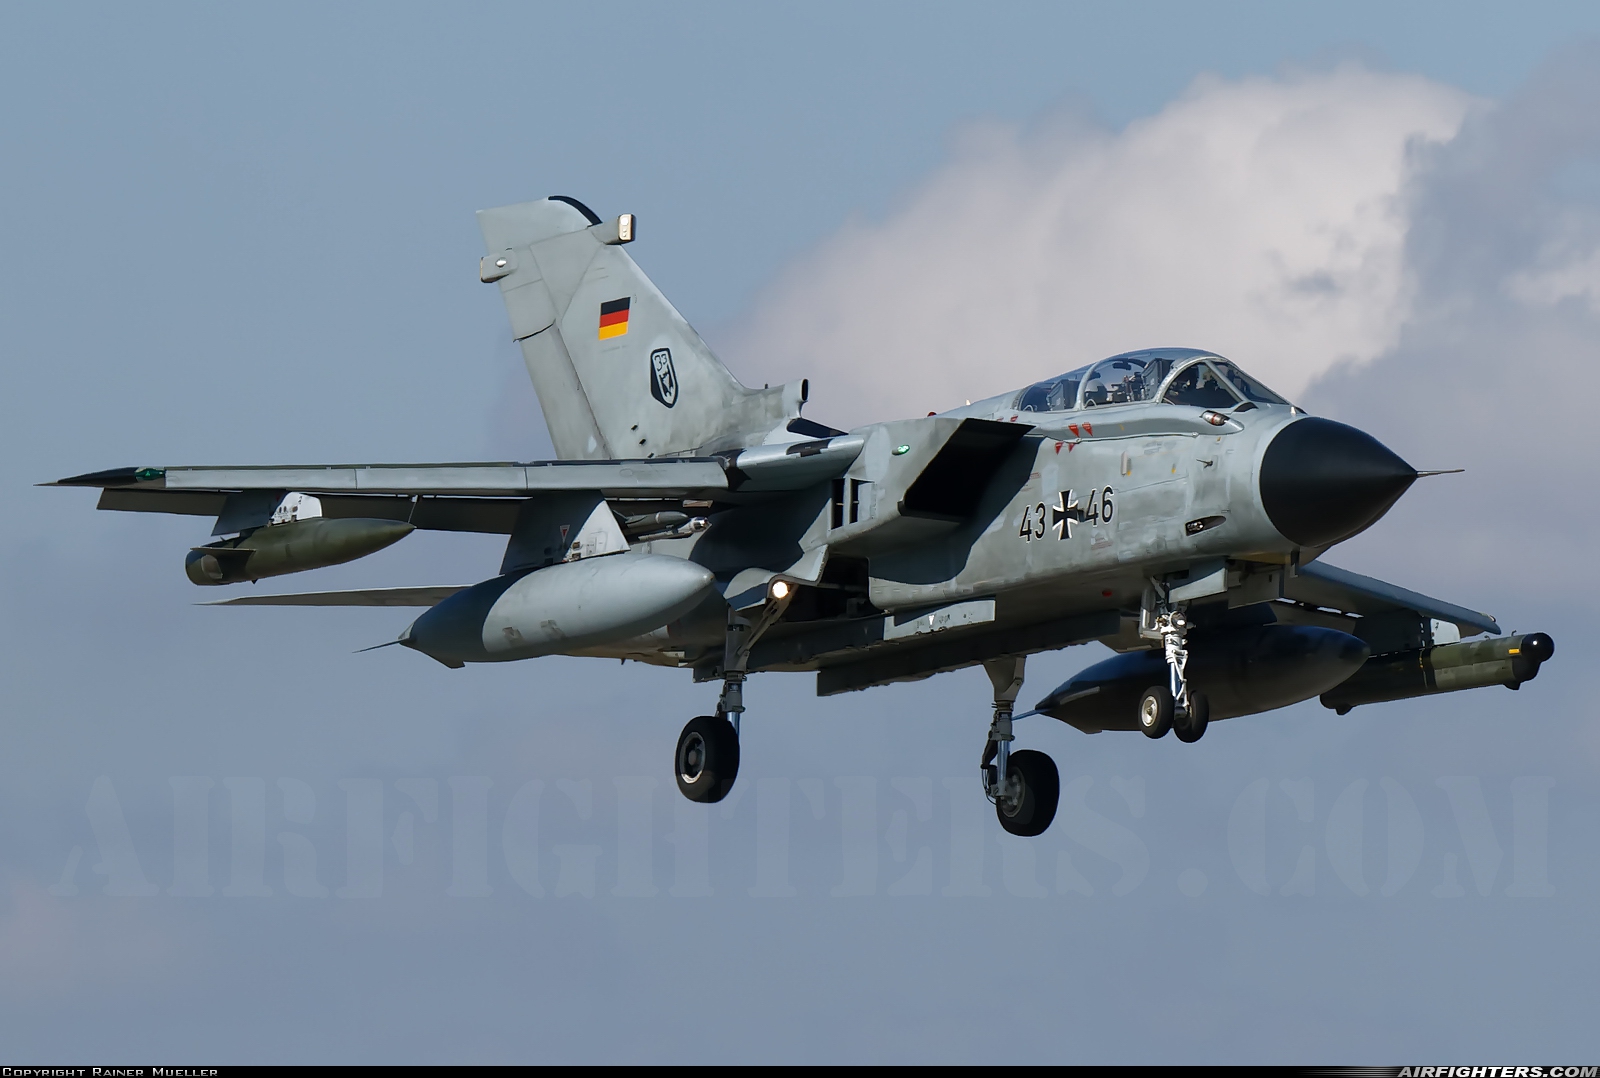 Germany - Air Force Panavia Tornado IDS 43+46 at Wittmundhafen (Wittmund) (ETNT), Germany